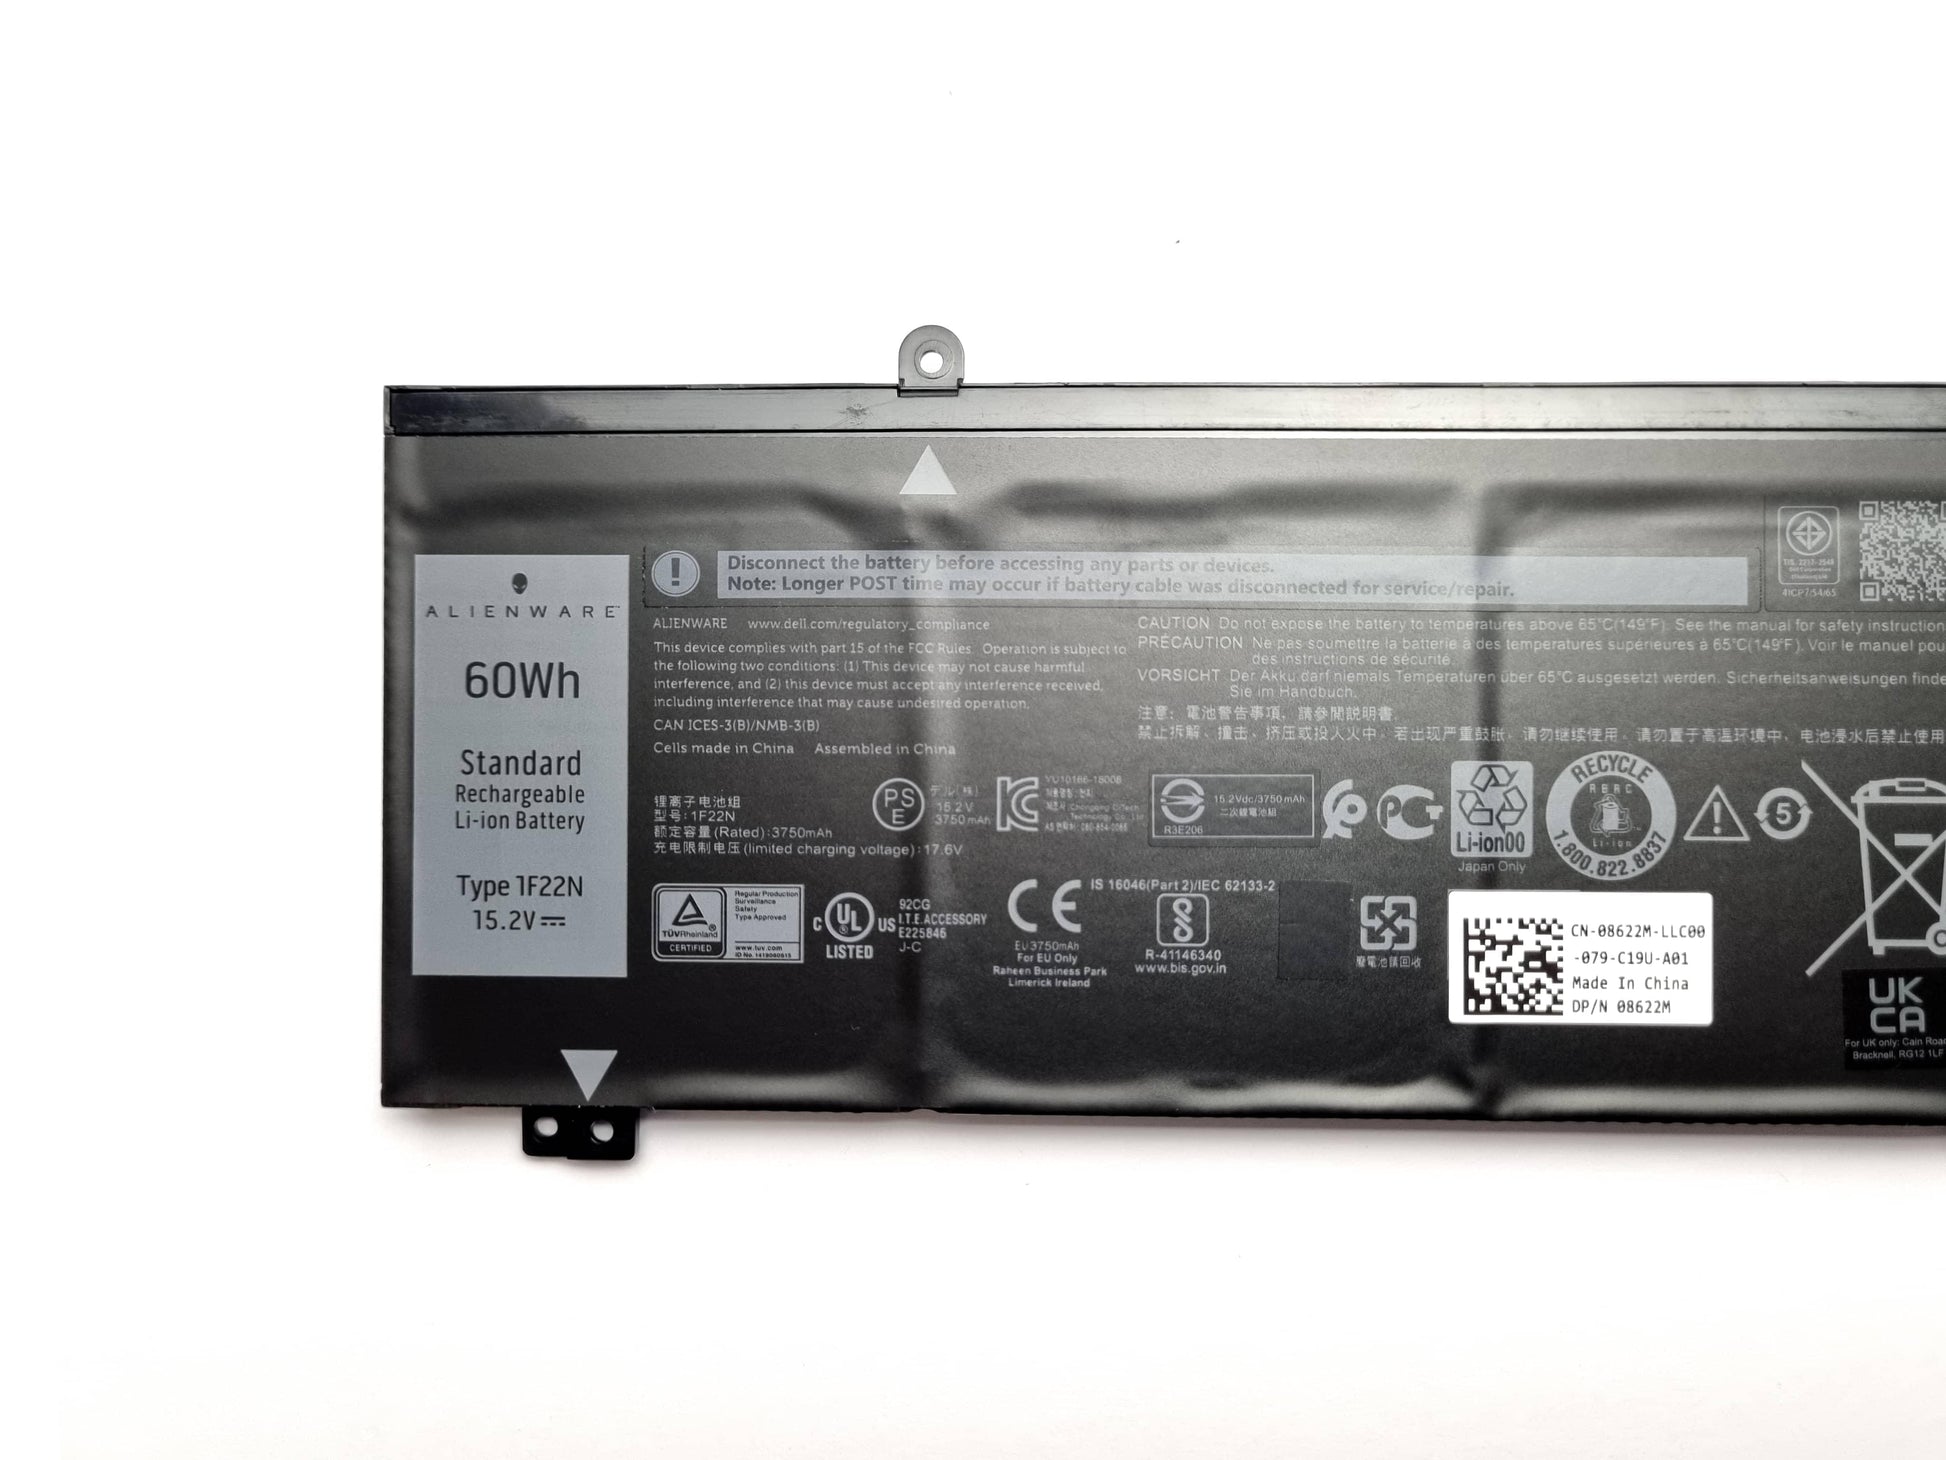 Dell G Series & Alienware M15, M17  Battery 60Wh 4 Cell 1F22N 8622M HYWXJ Dell Alienware